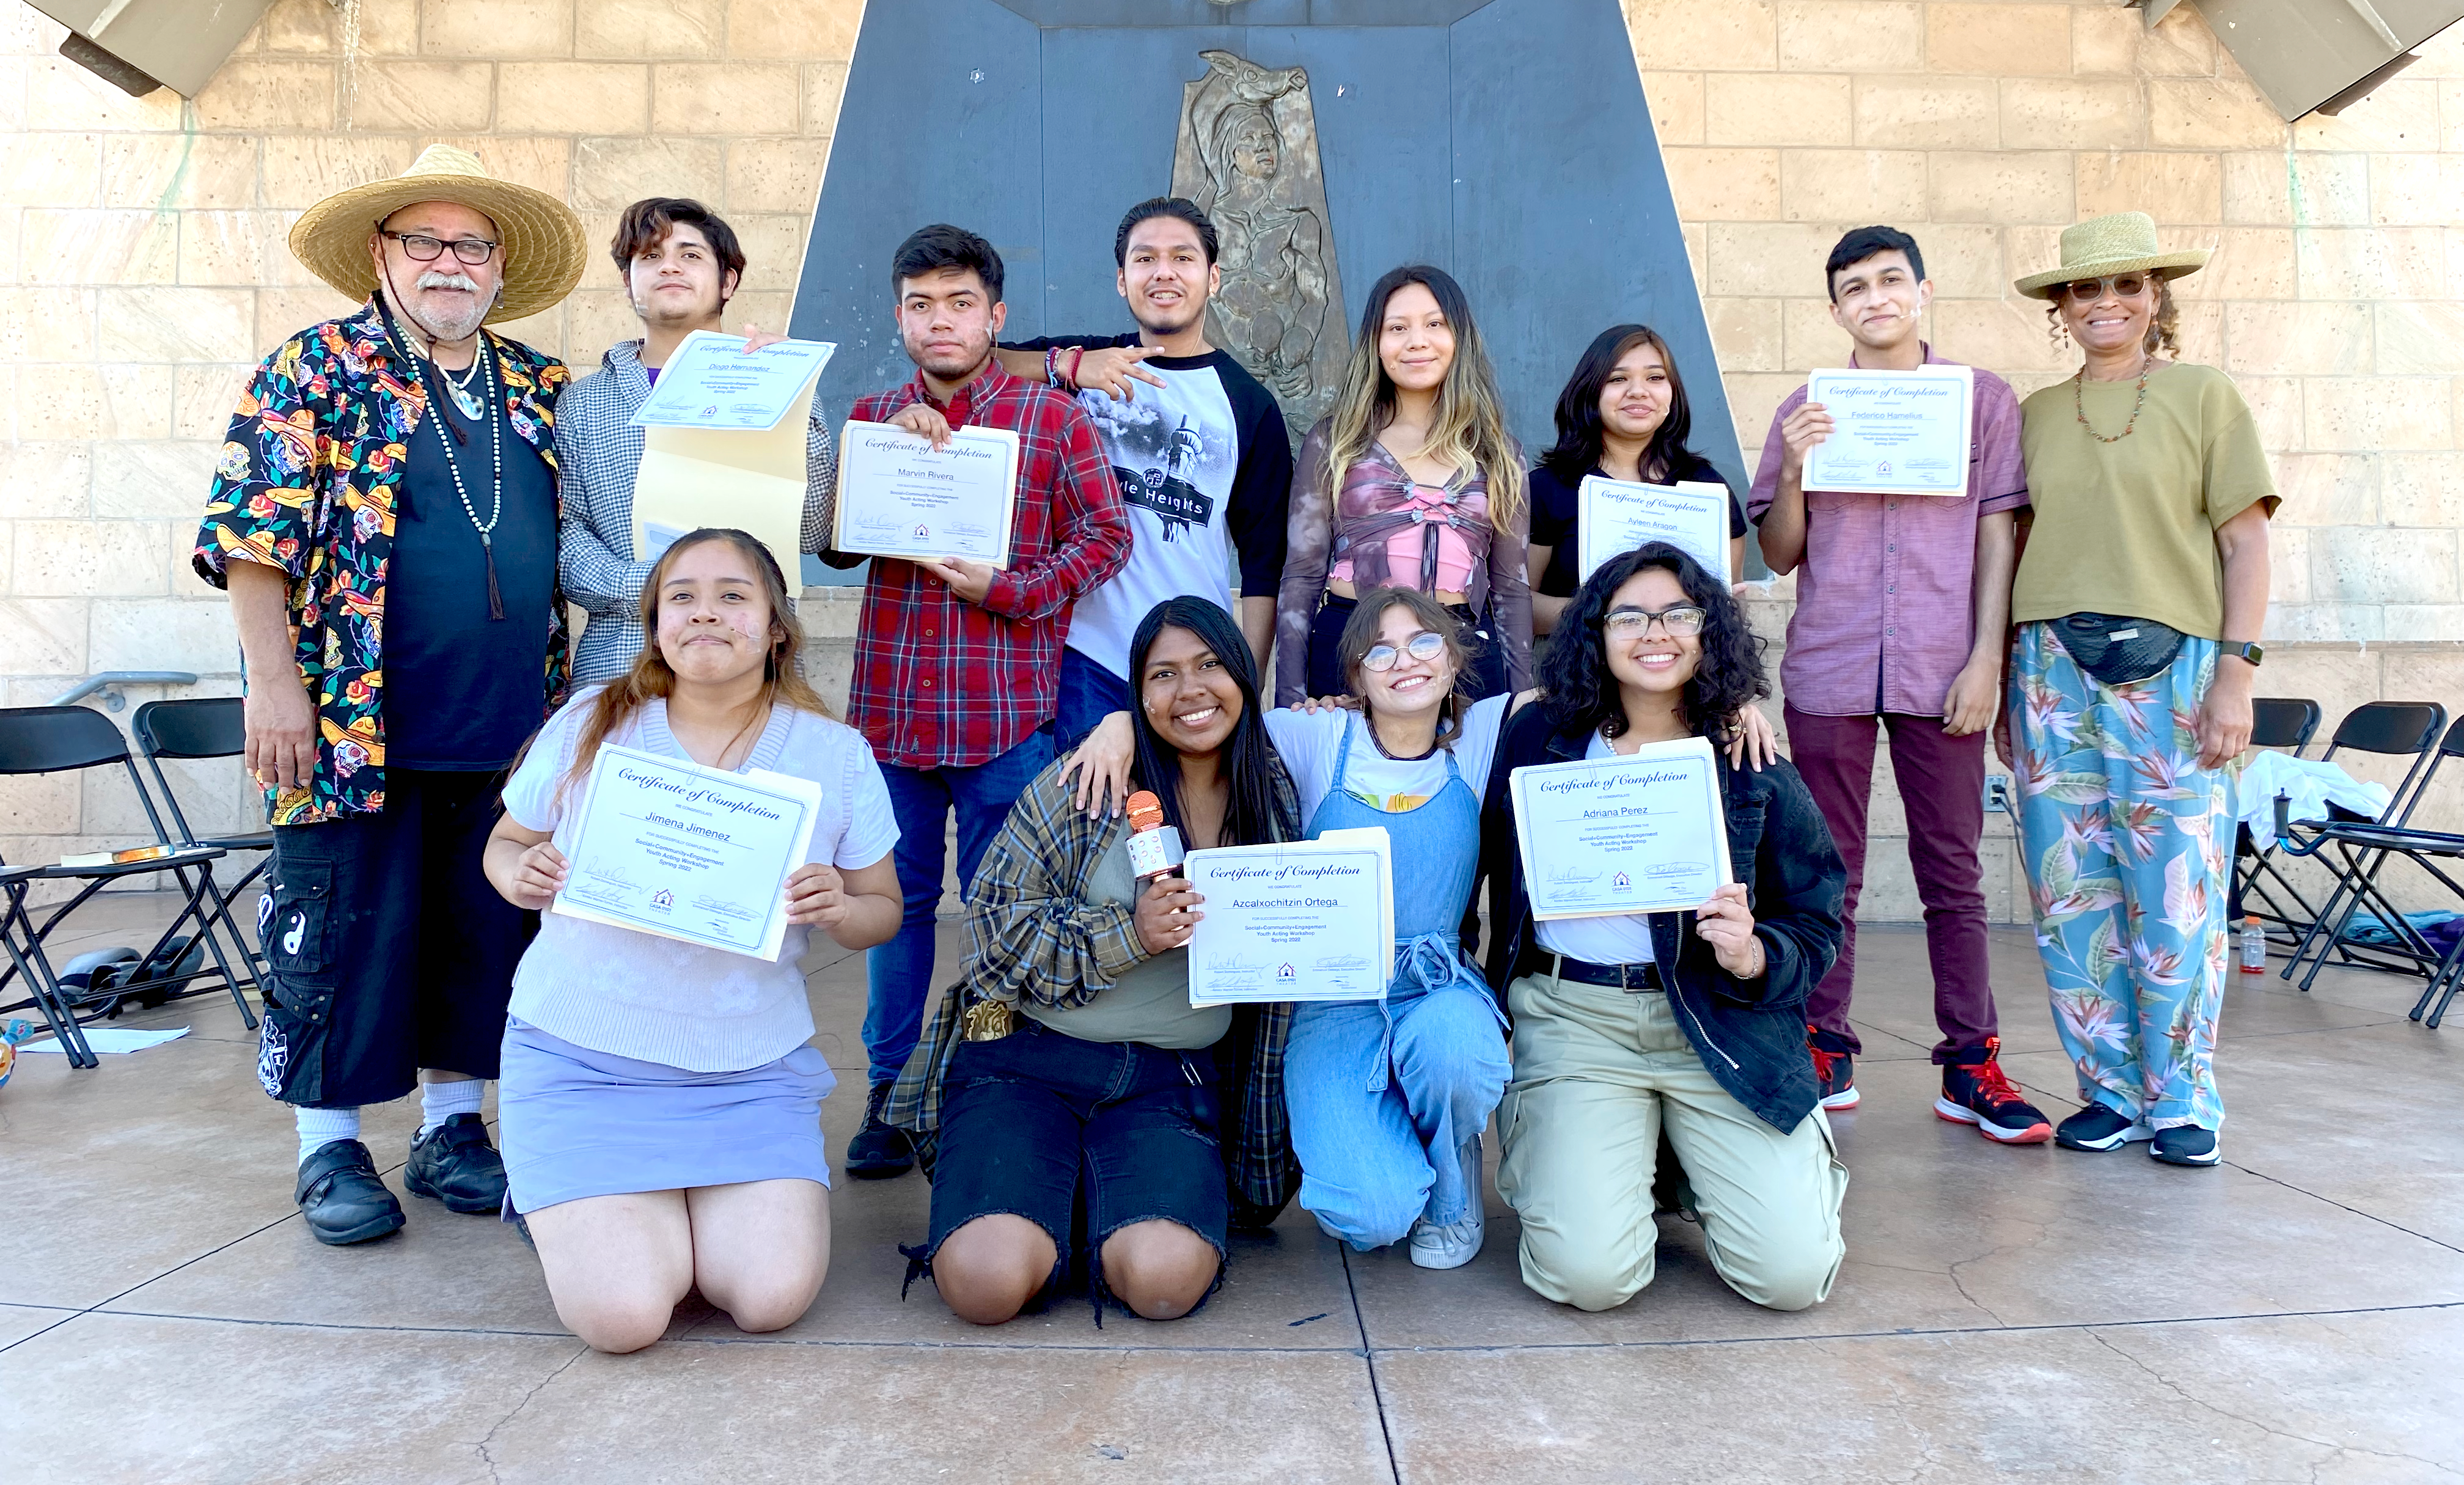 A group of high school students gather for a group photo while showing off their certificates.